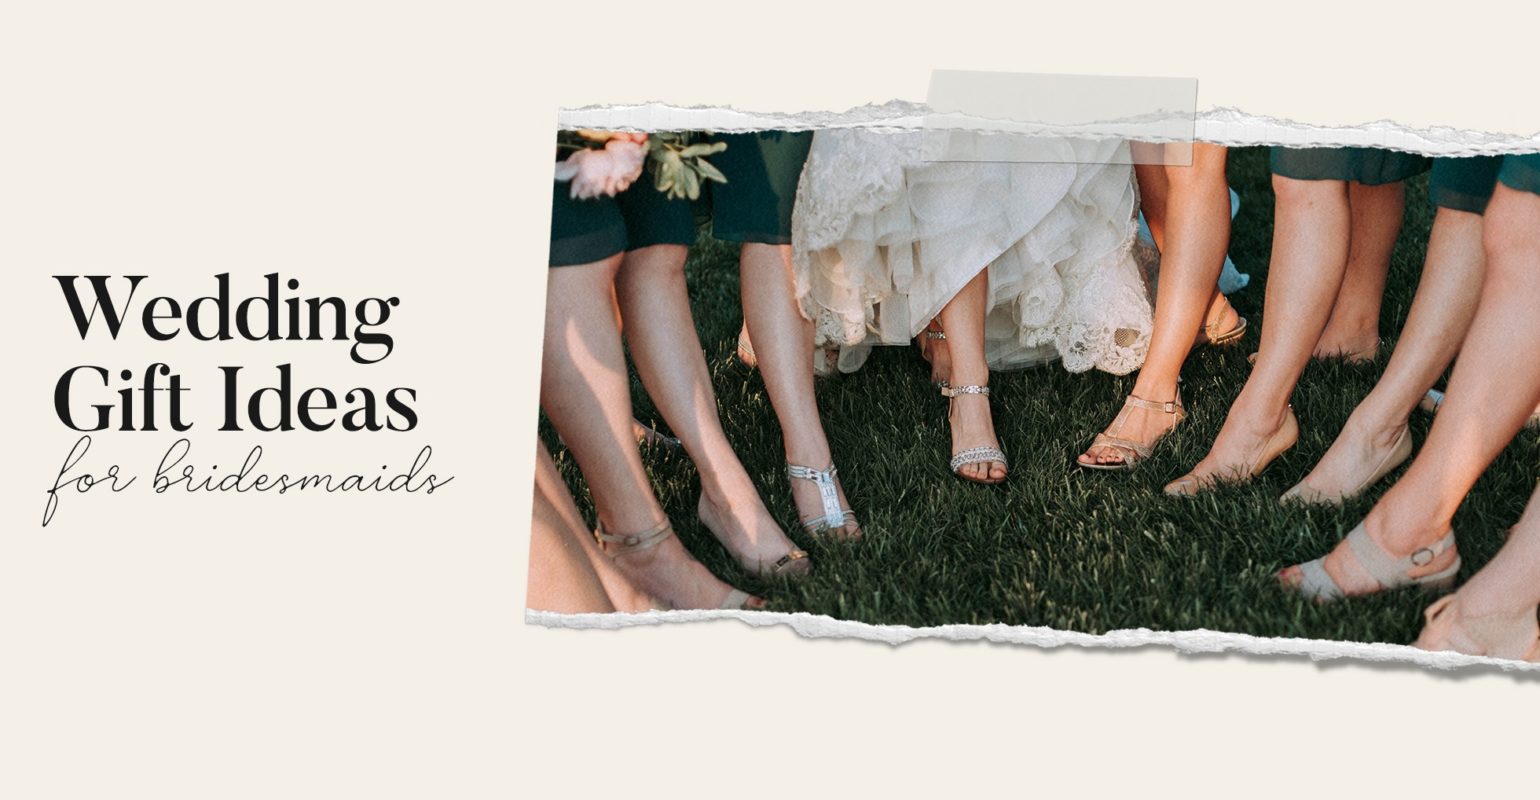 7 Wedding Gift Ideas for Bridesmaids That Your BFFs Will Love